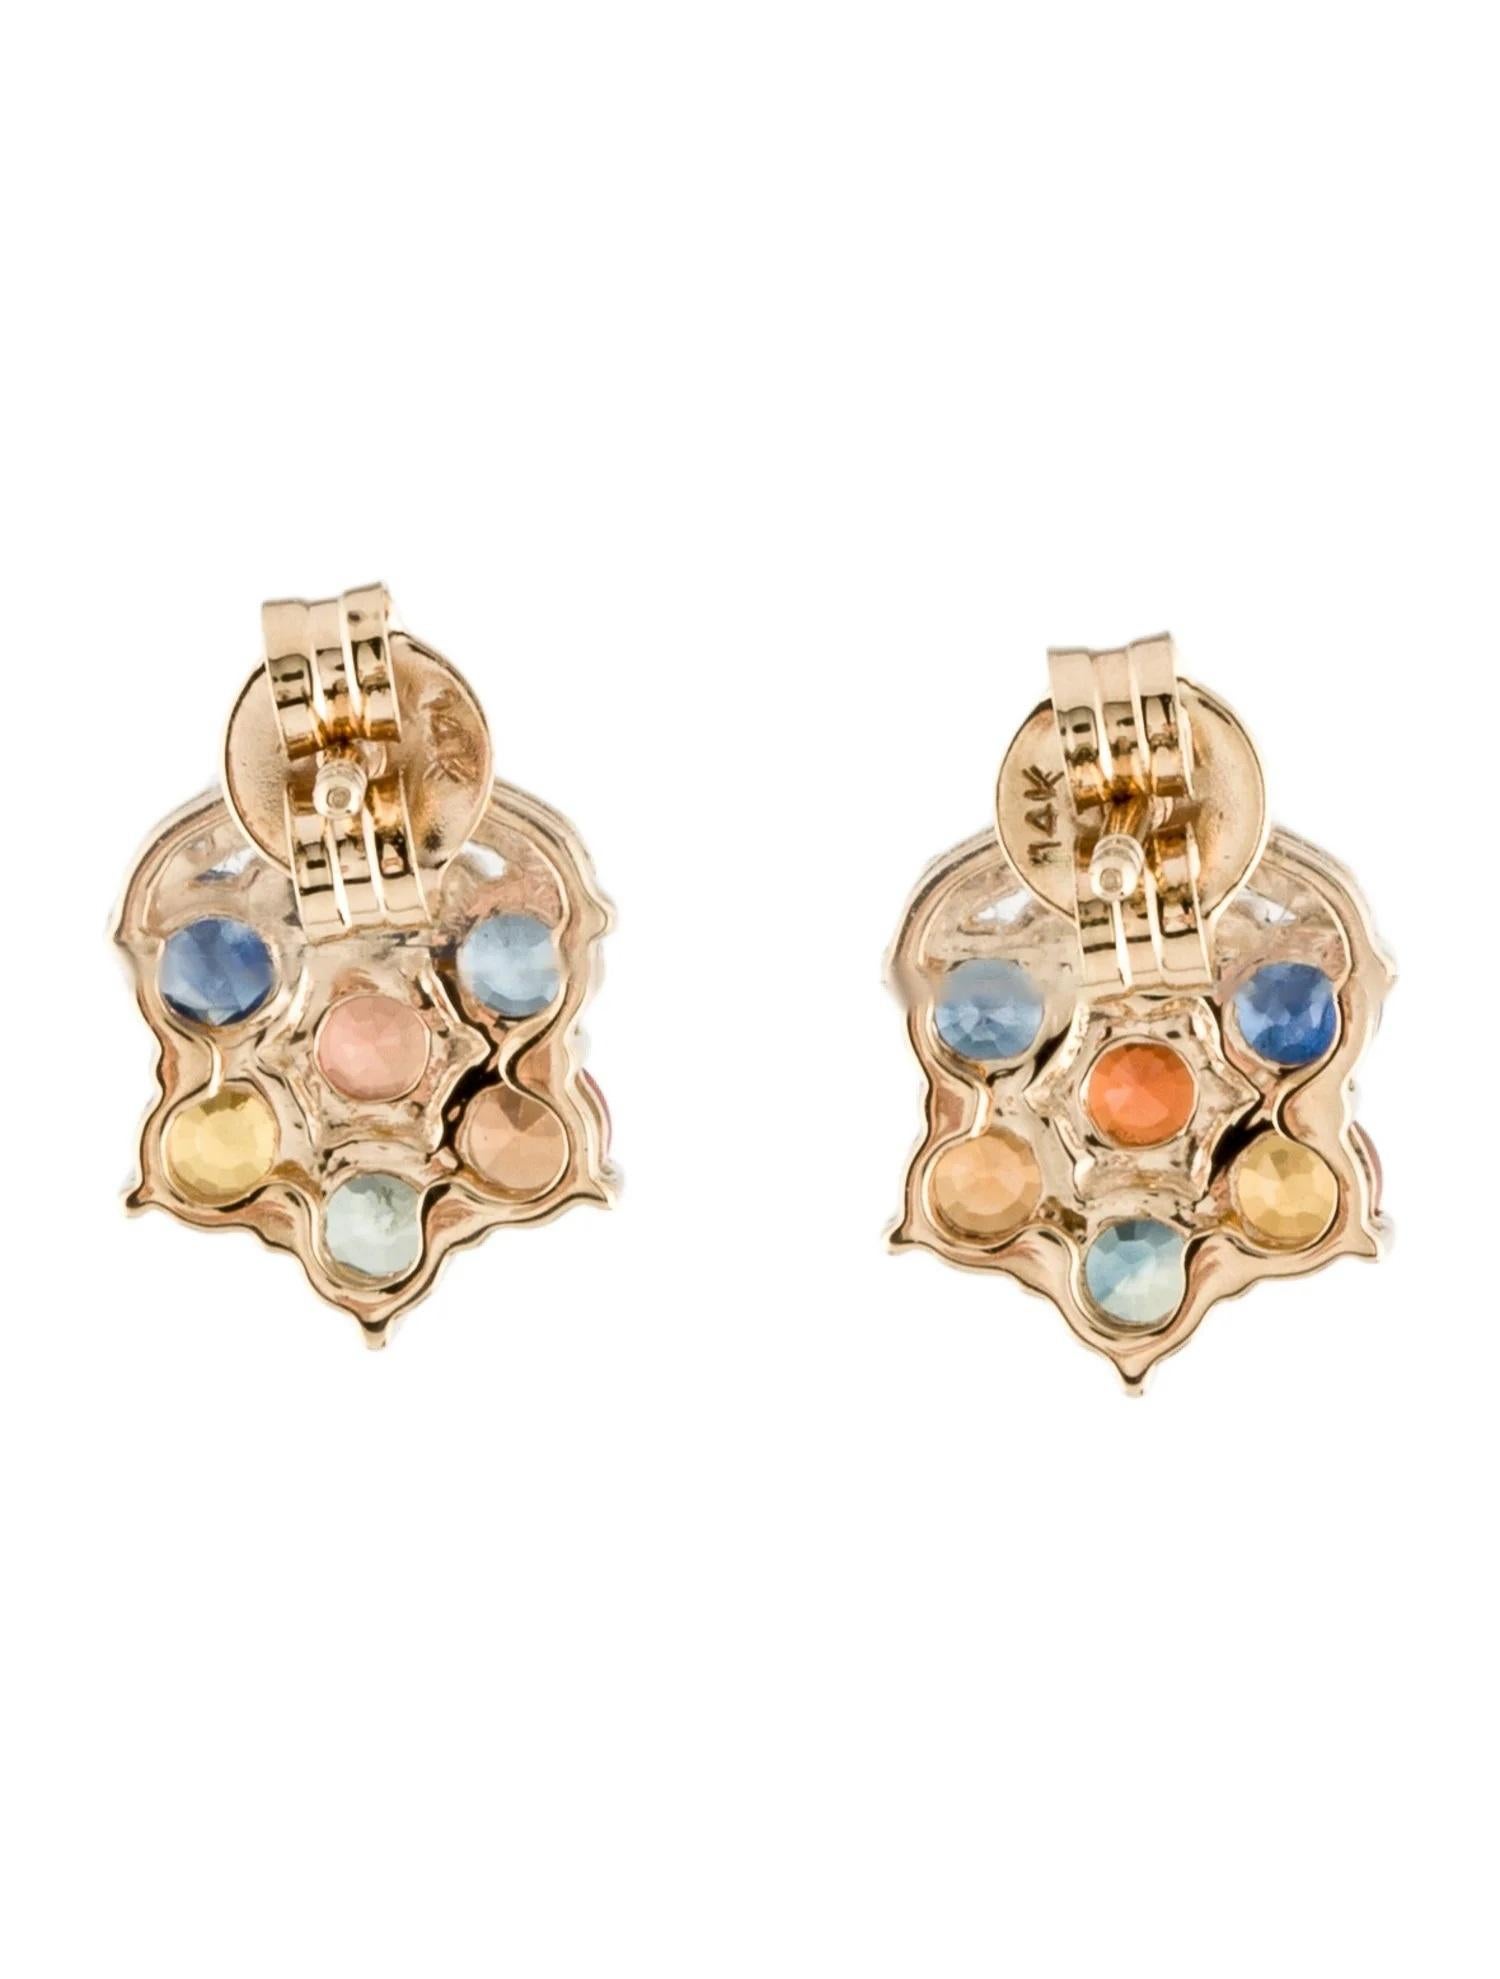 Artist Dazzling 14K Yellow Gold Earrings with Multi-Colored Sapphire and Diamonds For Sale